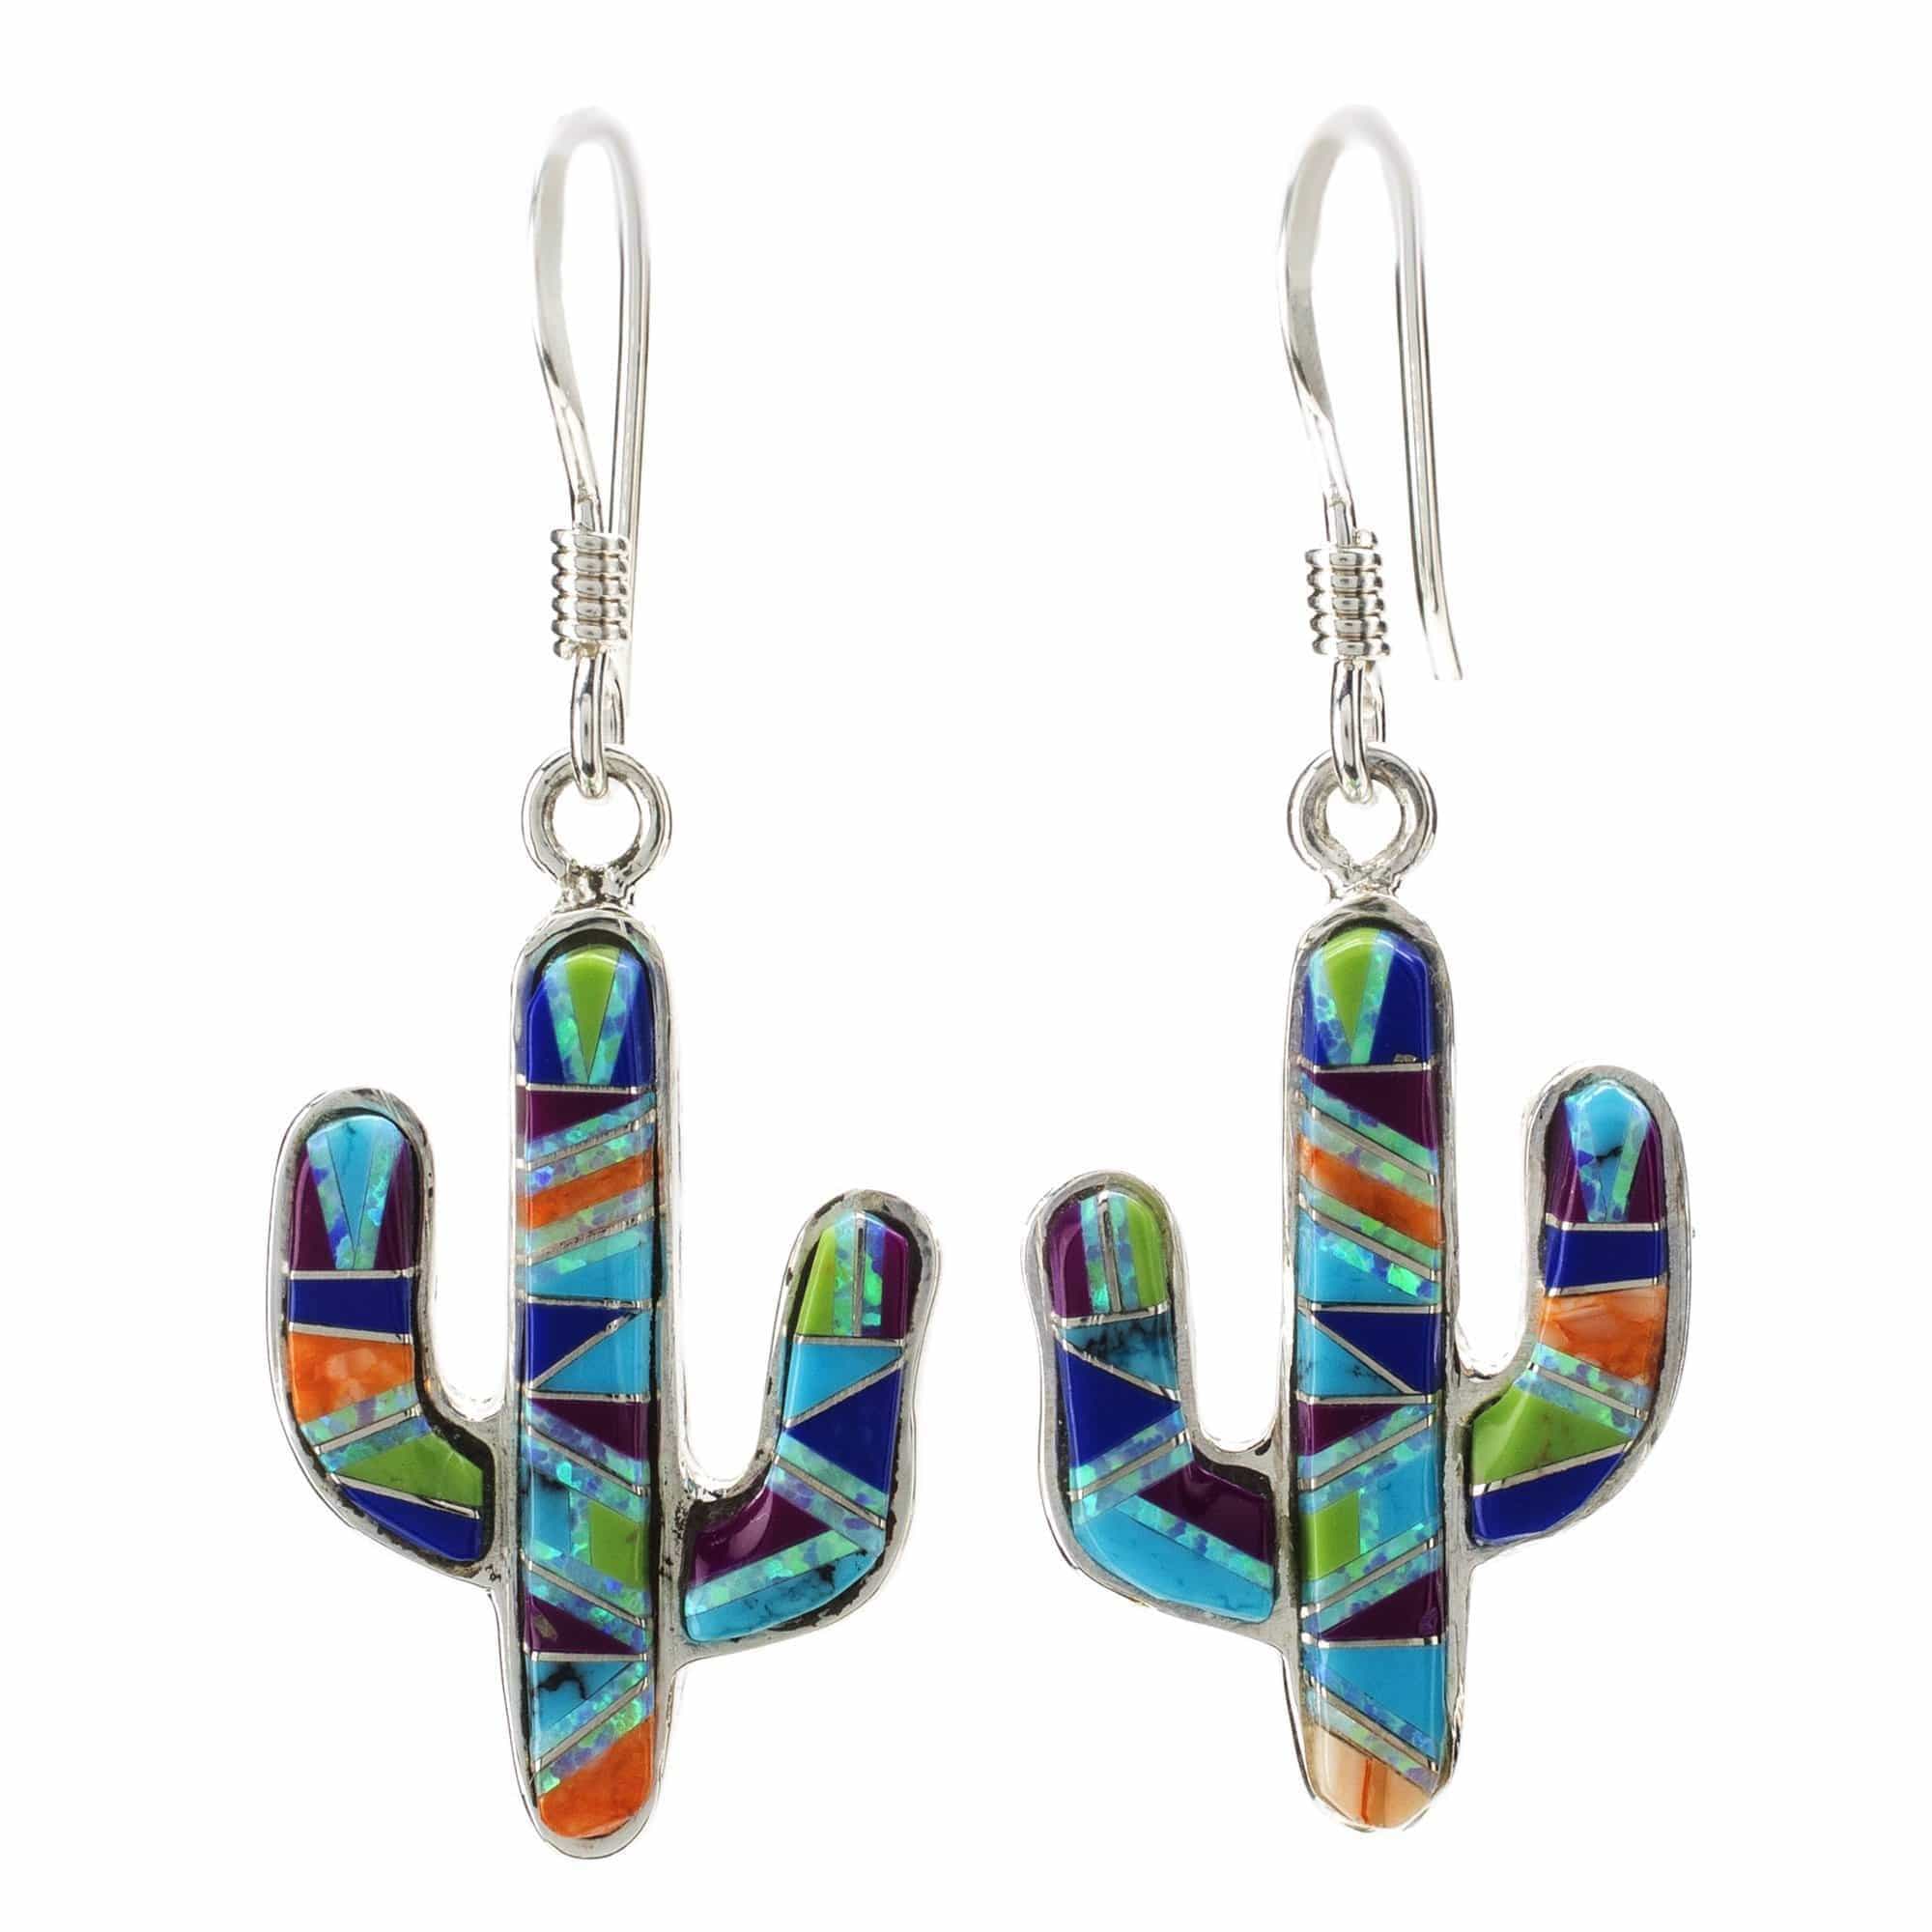 Kalifano Southwest Silver Jewelry Multi Gemstone Cactus 925 Sterling Silver Earring with French Hook USA Handmade with Opal Accent NME.0602.MT